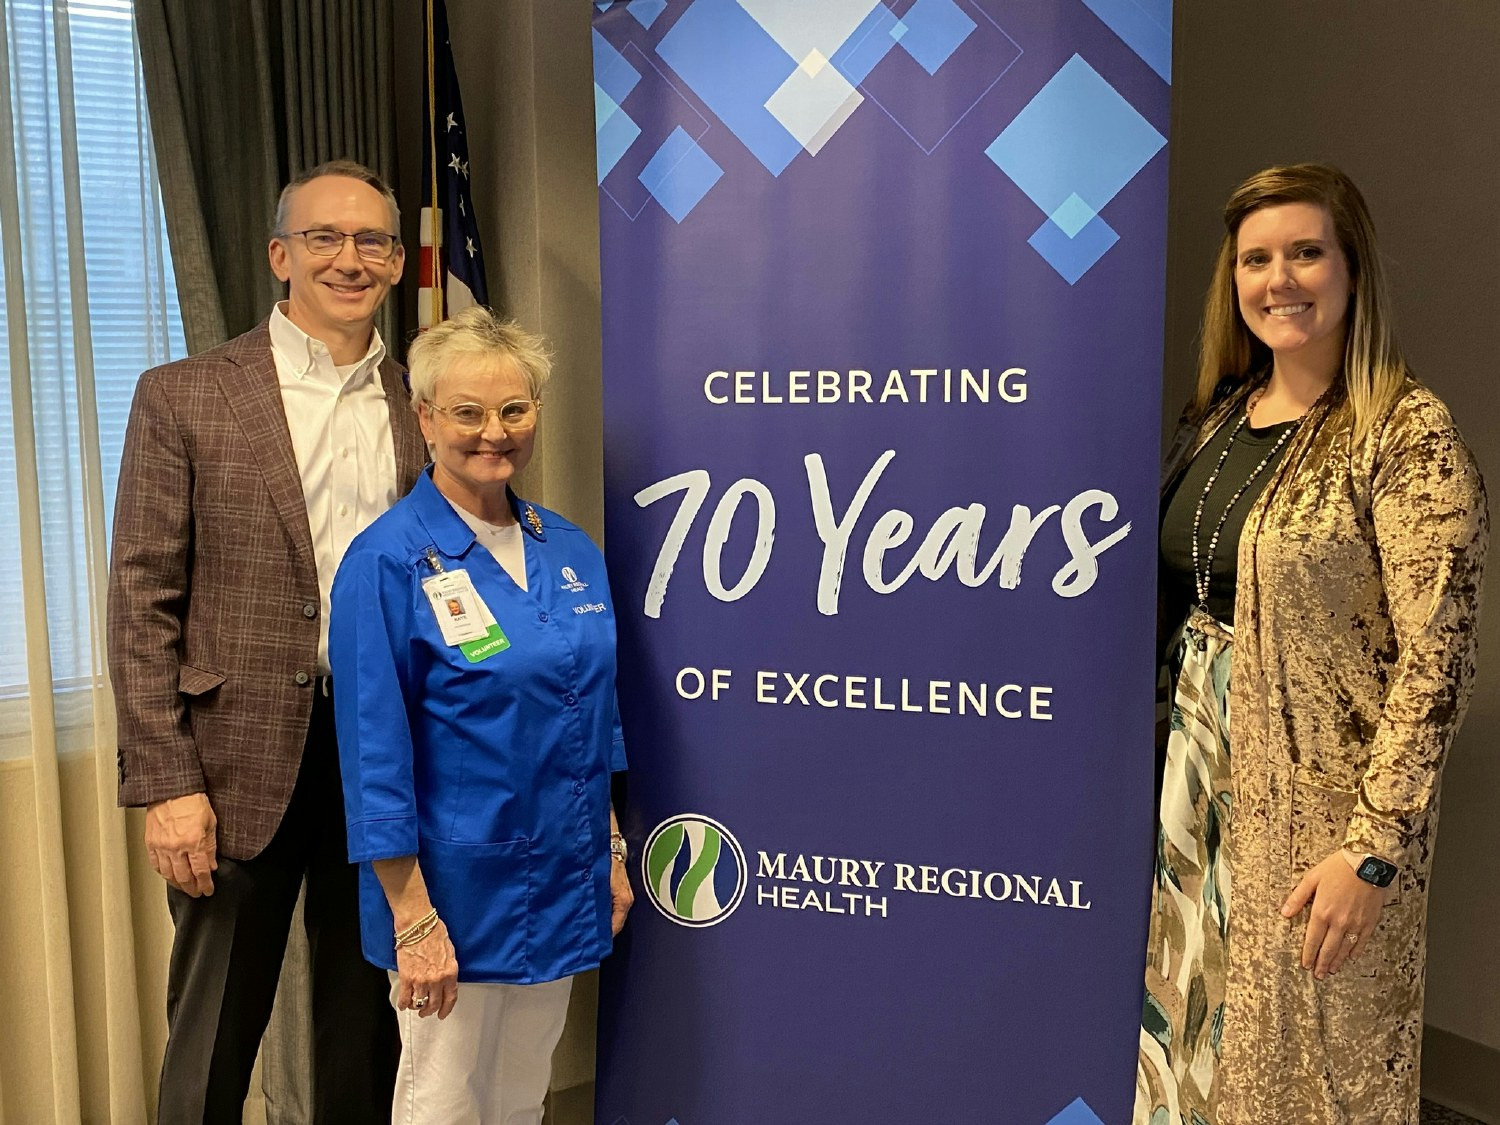 Our CEO, alongside colleagues celebrating 70 years of success at Maury Regional Health